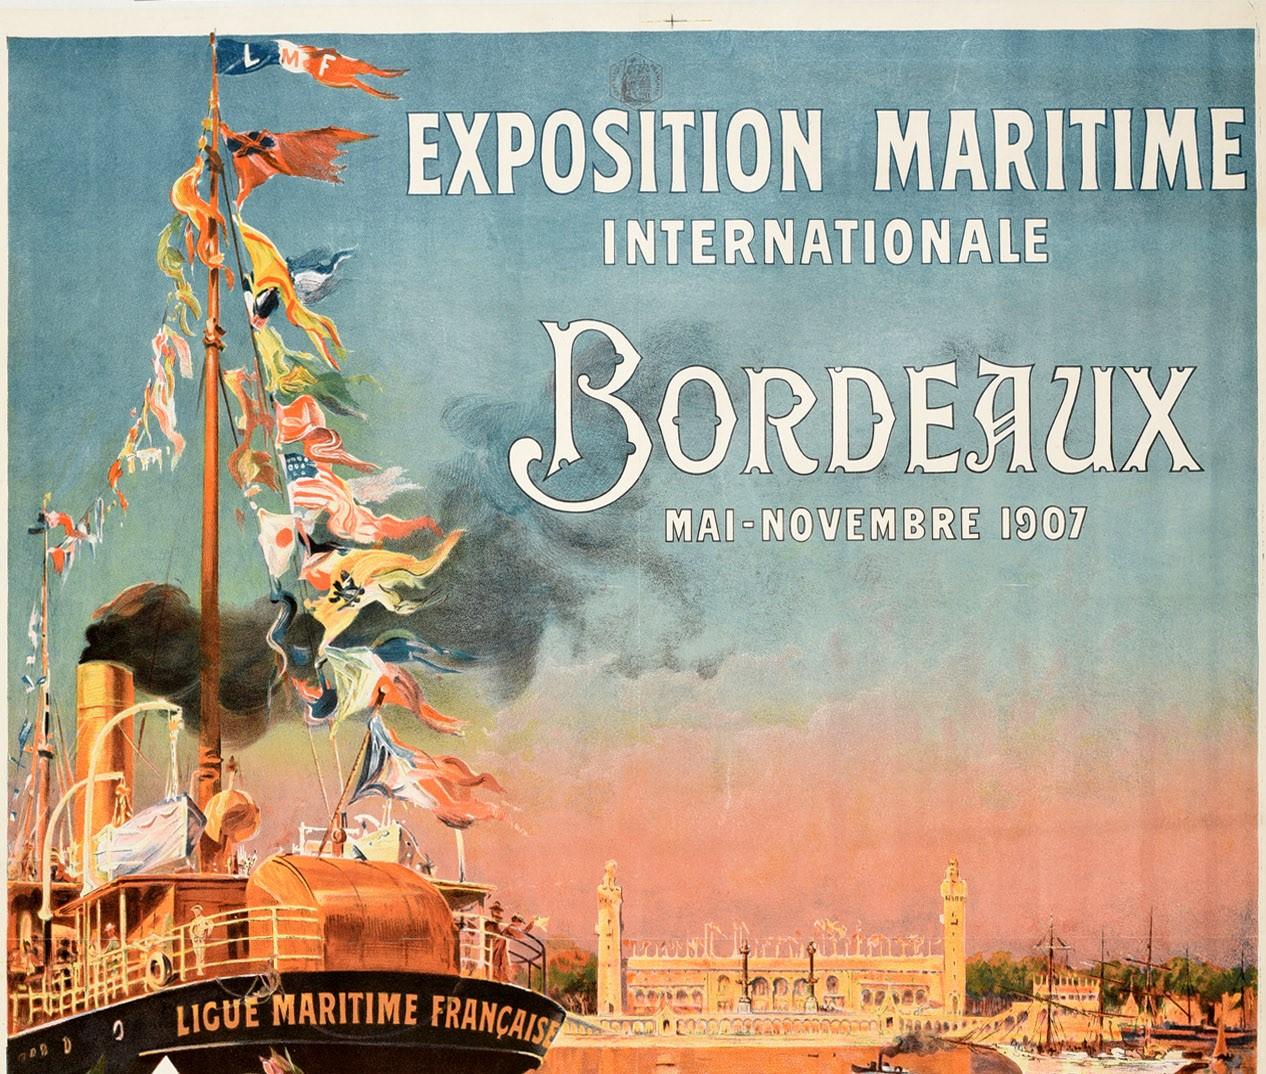 Original antique poster advertising the International Maritime Exhibition Bordeaux 1907 / Exposition Maritime Internationale Bordeaux 1907 featuring a great image by Antoine Ponchin (1872-1933) depicting a sailor rowing a fashionably dressed lady in